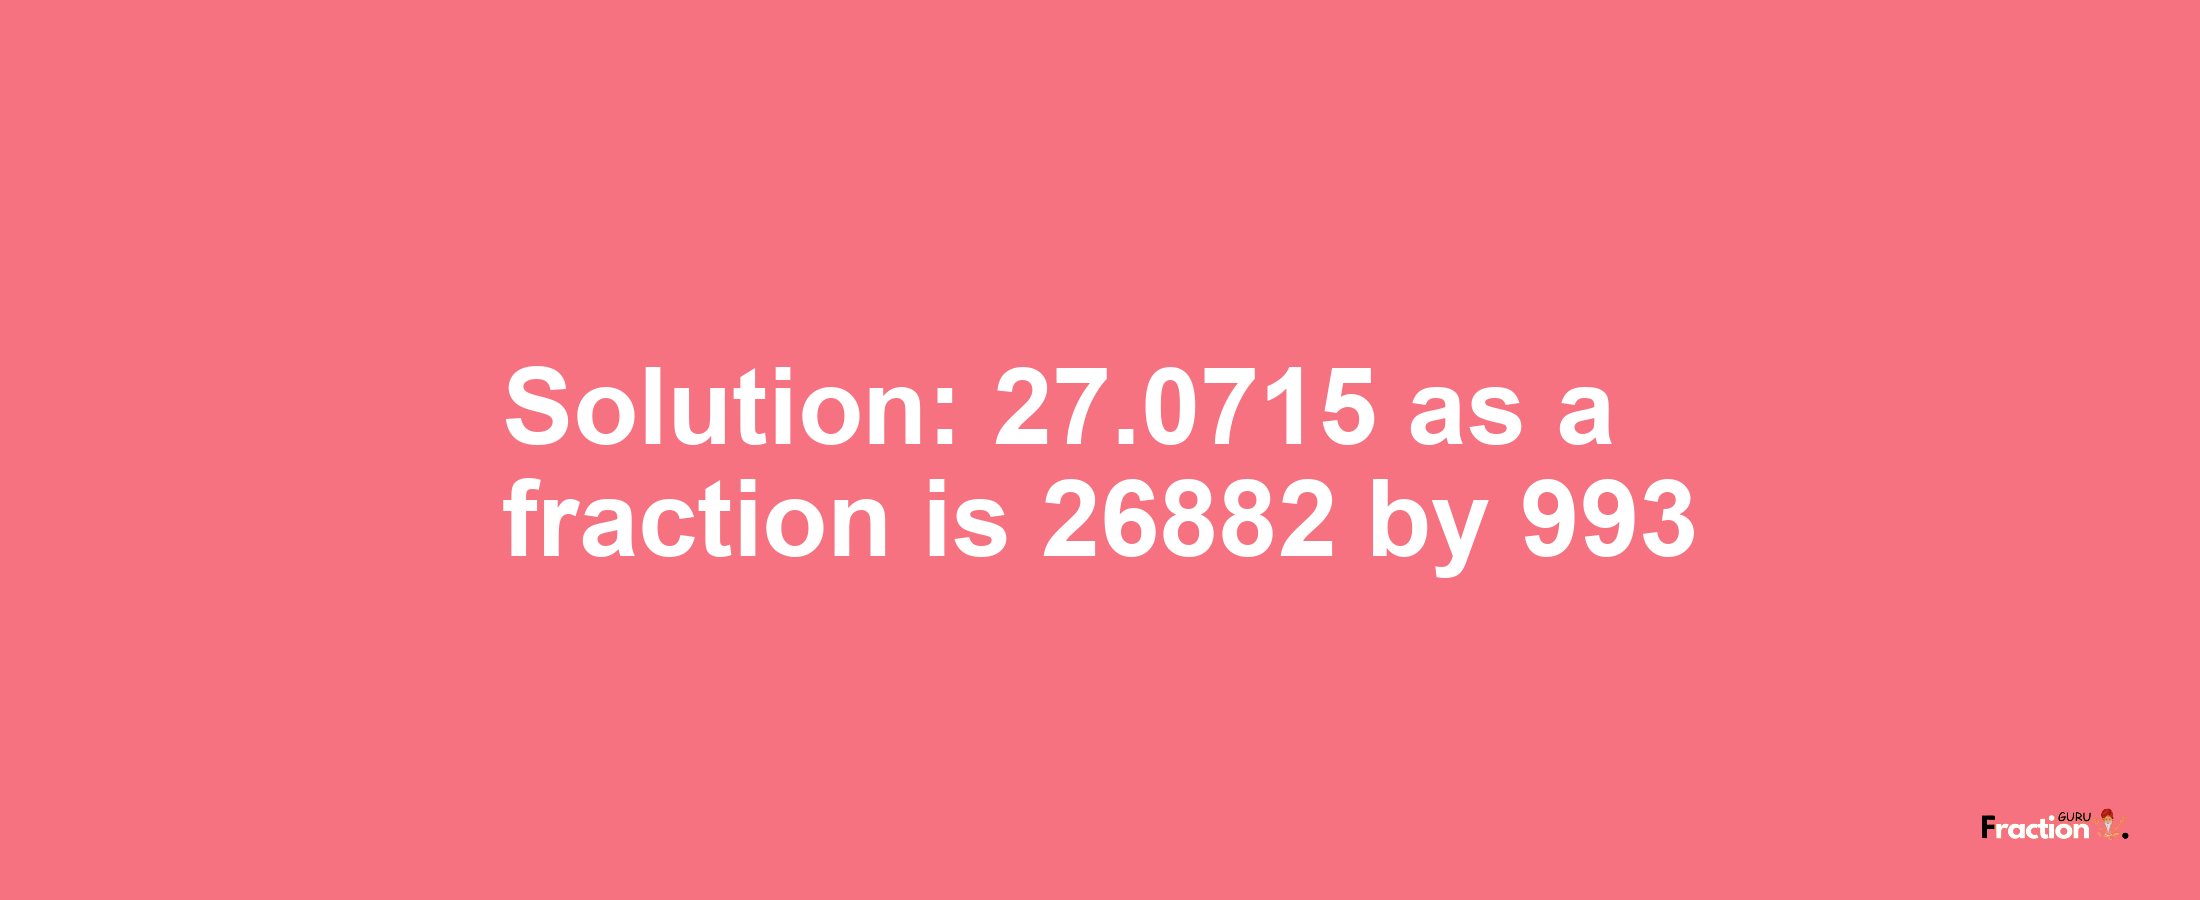 Solution:27.0715 as a fraction is 26882/993